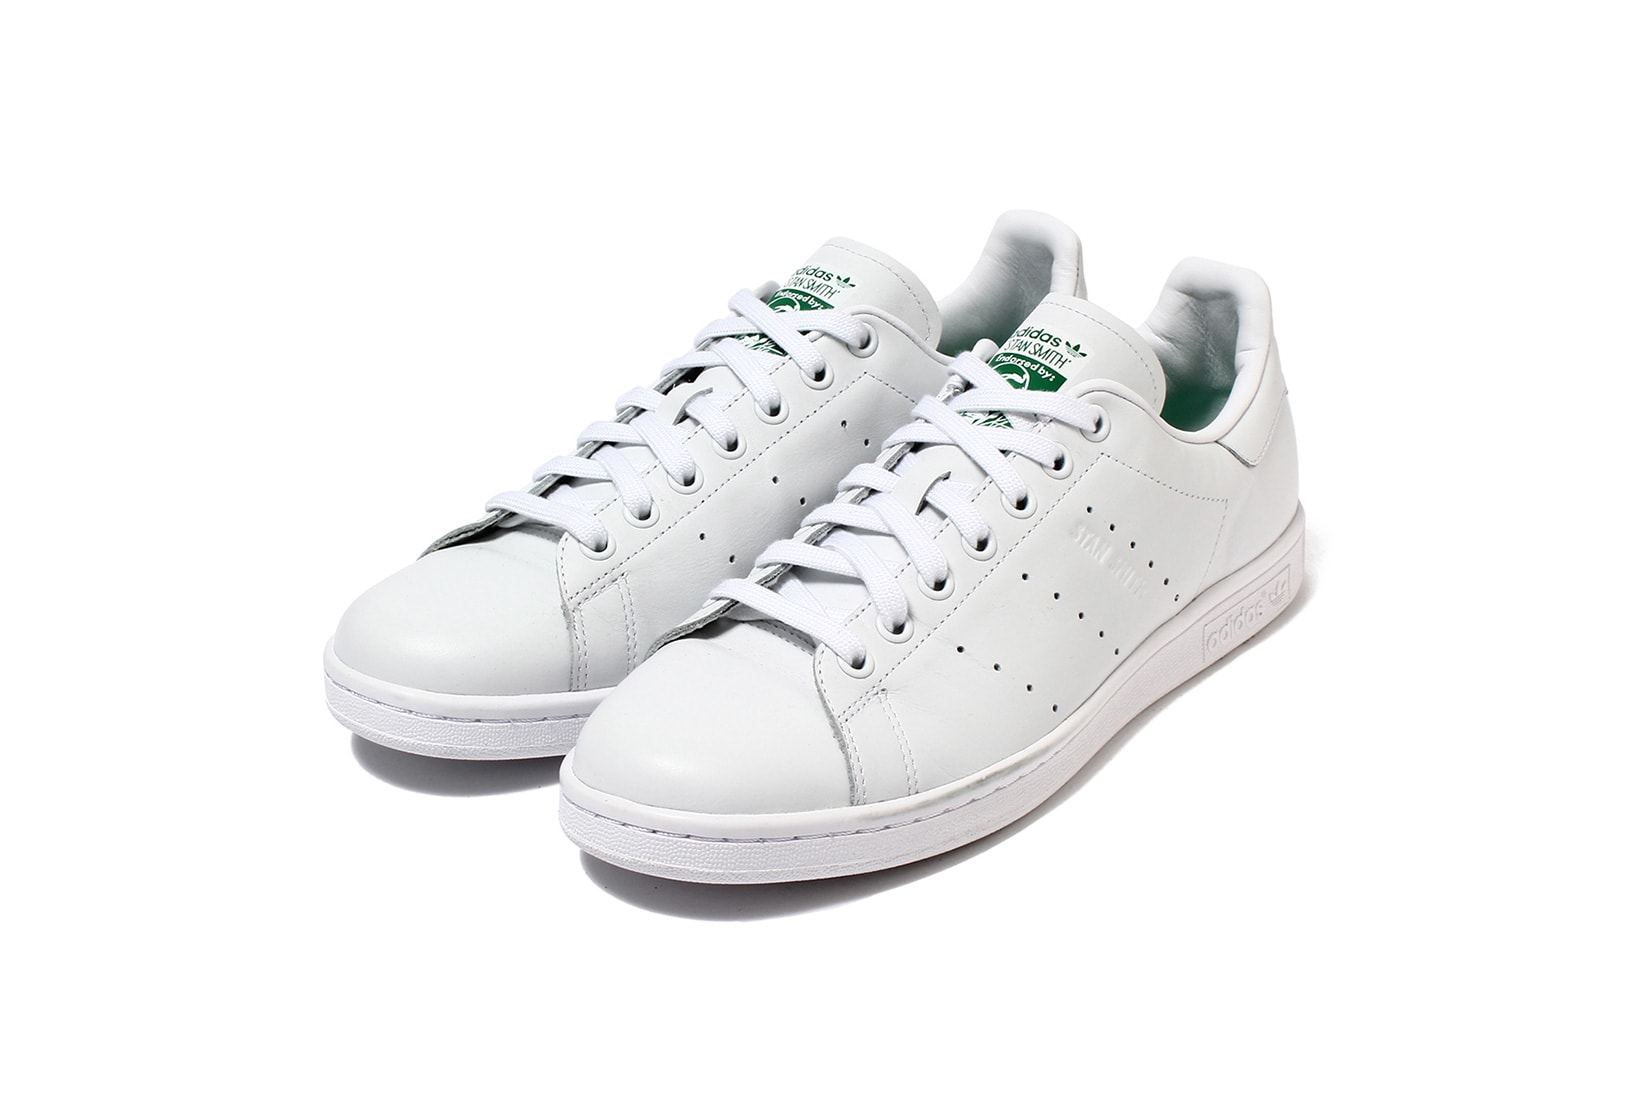 adidas Originals BEAMS Limited Edition Stan Smith Sneaker white green